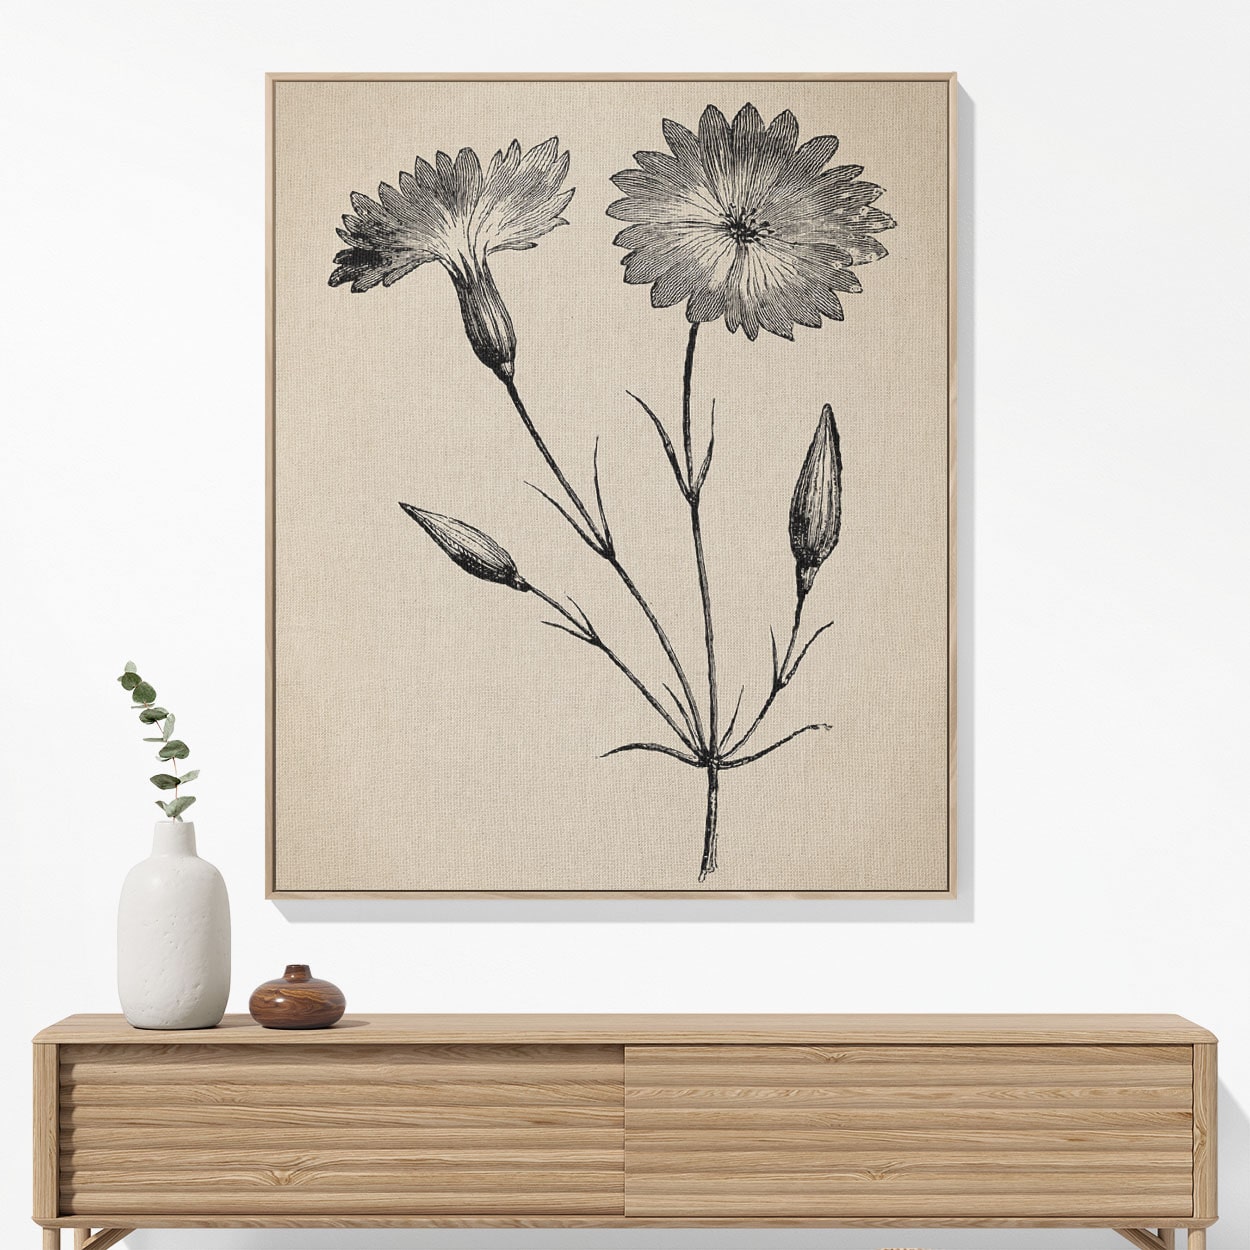 Floral Woven Blanket Hanging on a Wall as Framed Wall Art